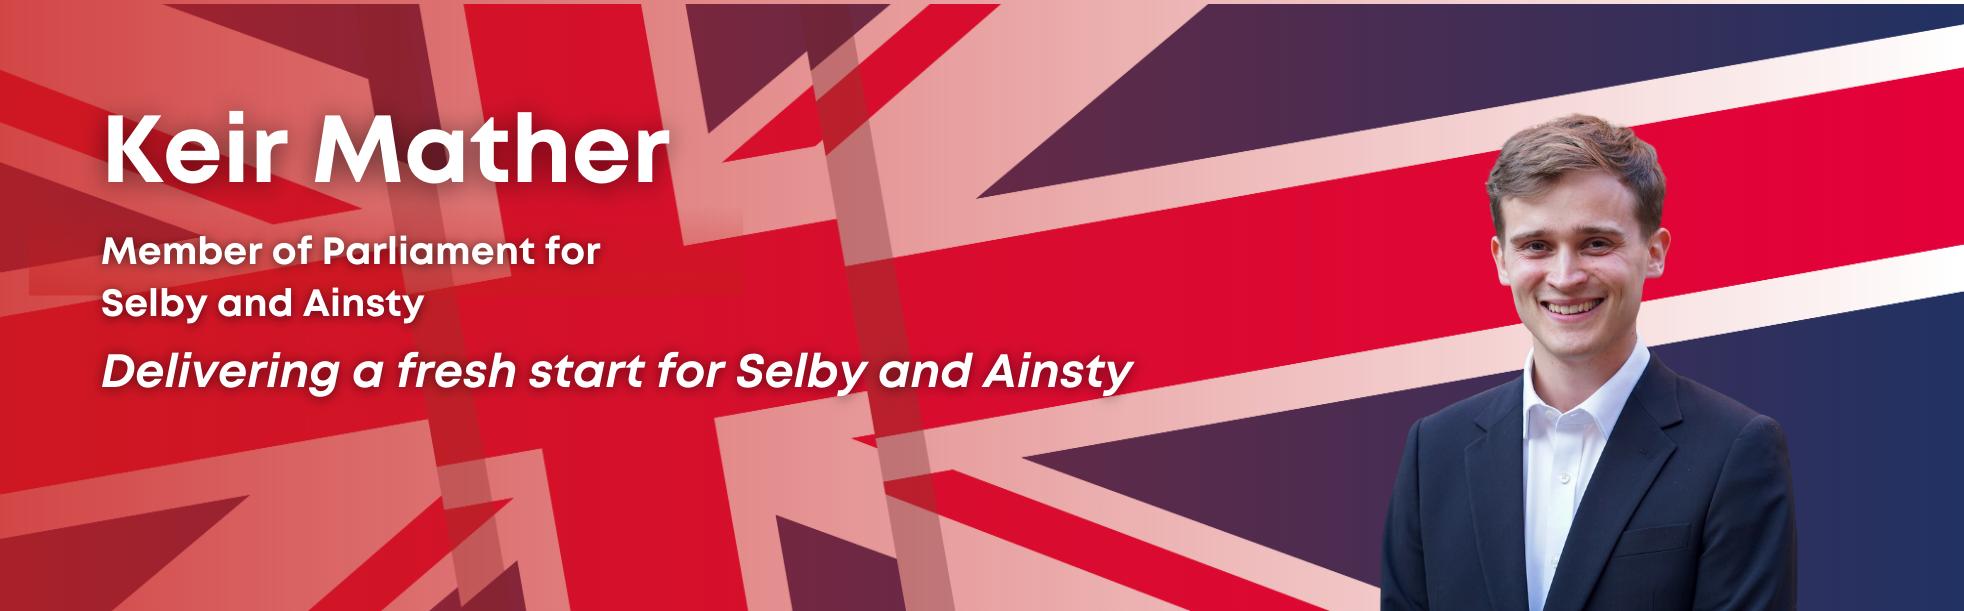 Image of Keir Mather MP, with a British flag in the background & caption "Member of Parliament for Selby and Ainsty. Delivering a Fresh Start for Selby and Ainsty"